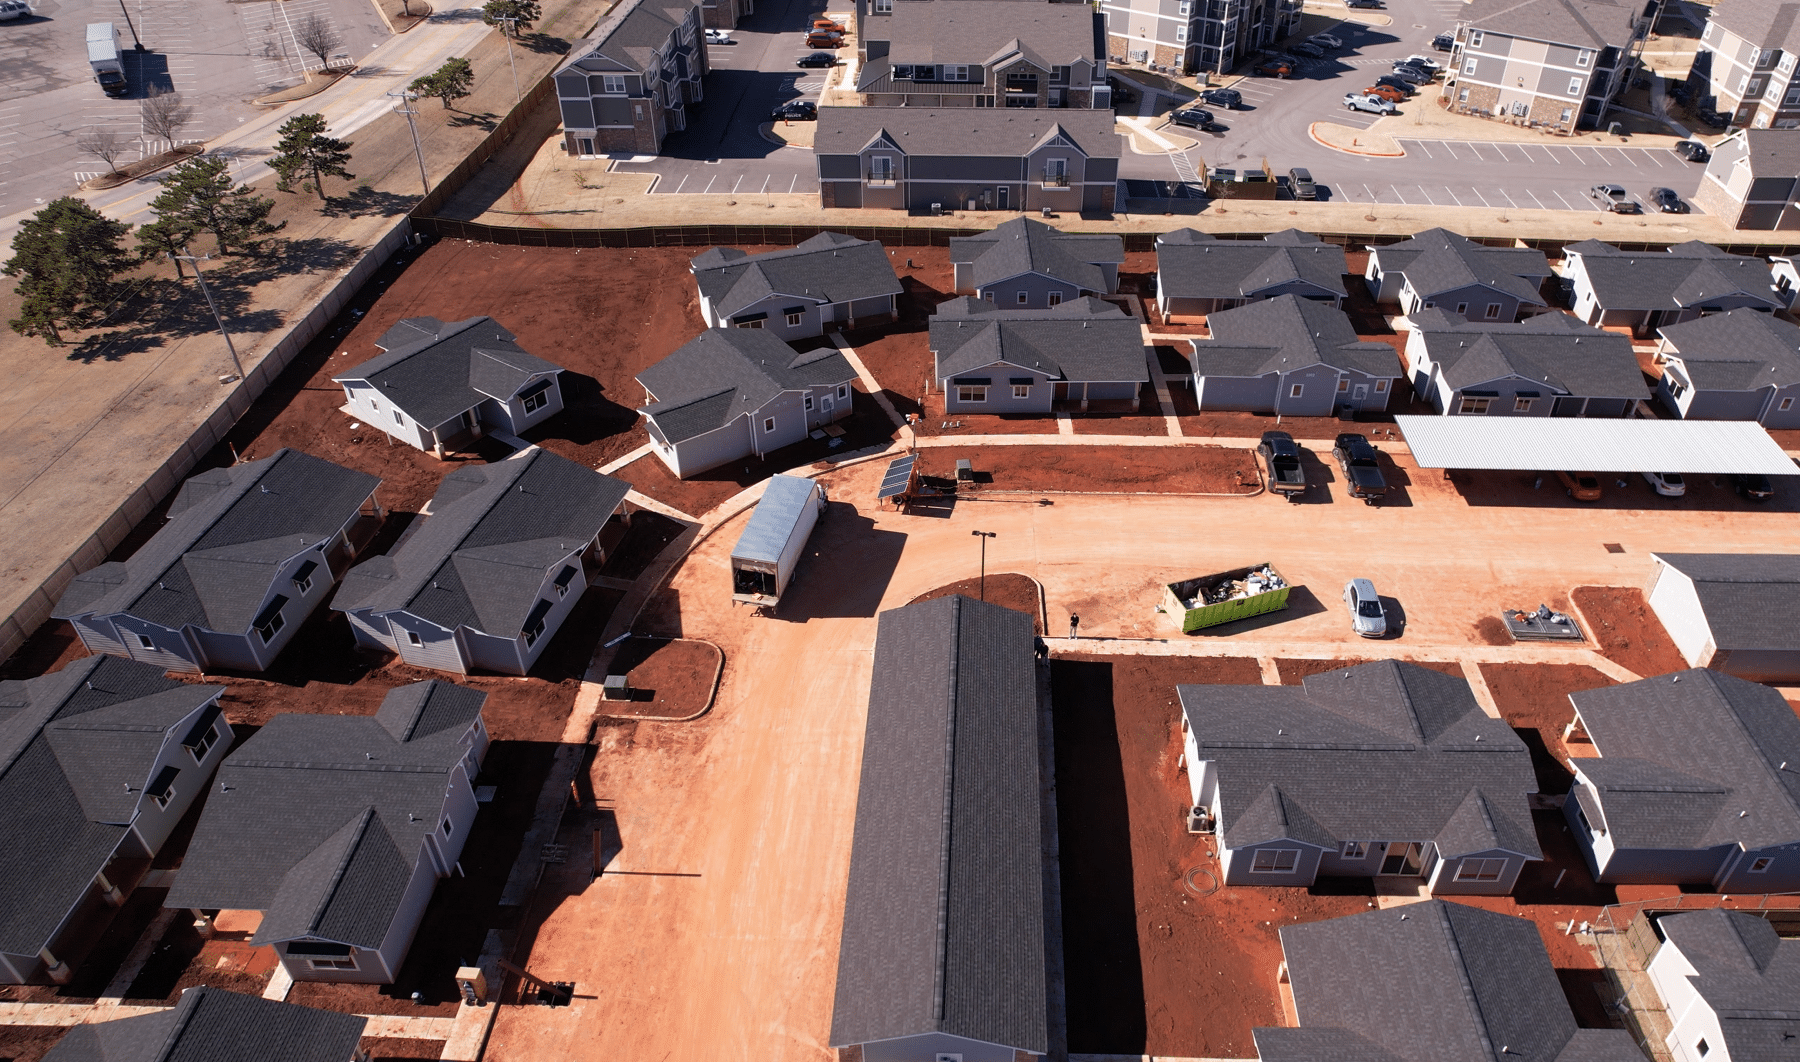 An aerial view of a neighborhood construction site